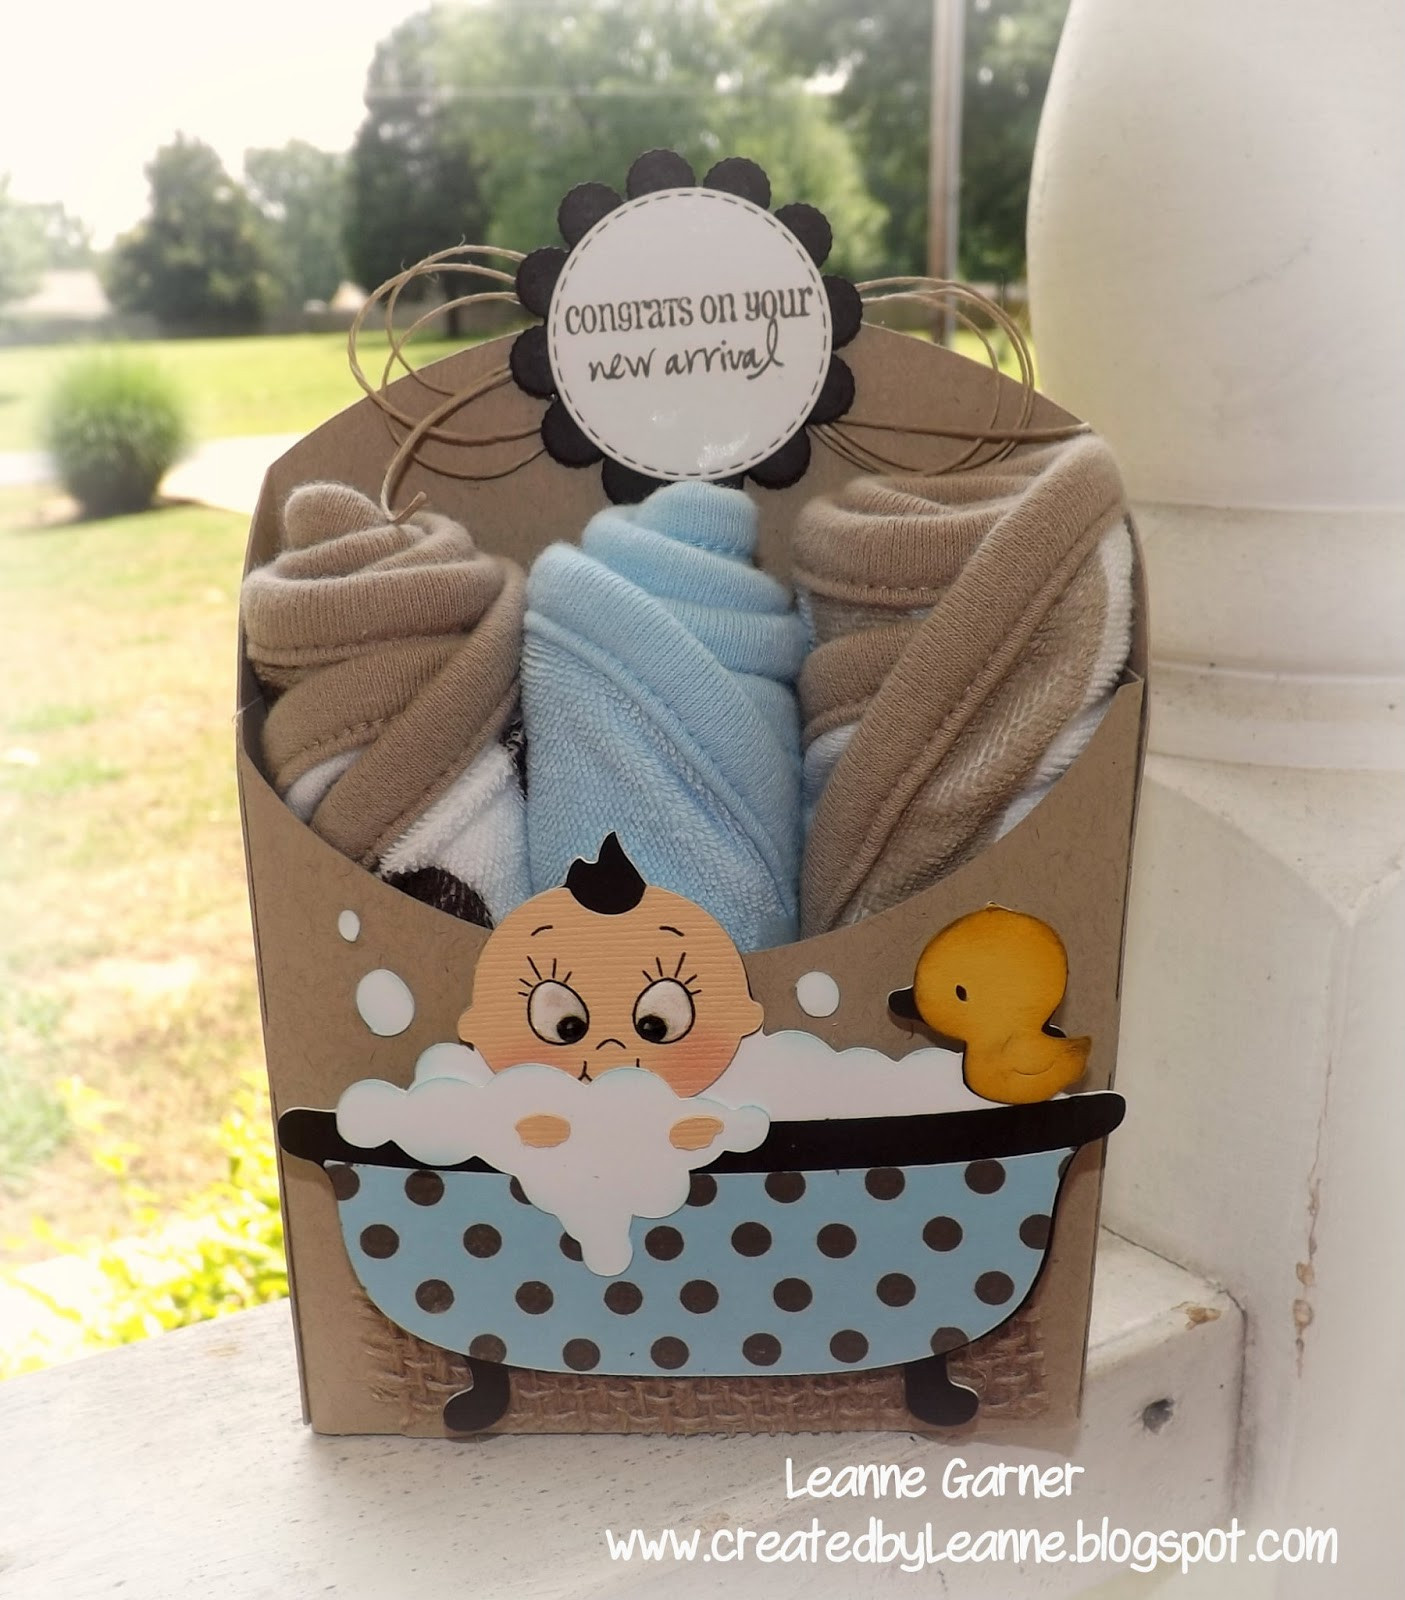 Awesome Baby Gift Ideas
 Unique Cool New Baby Gifts Baskets For Boys & Girls